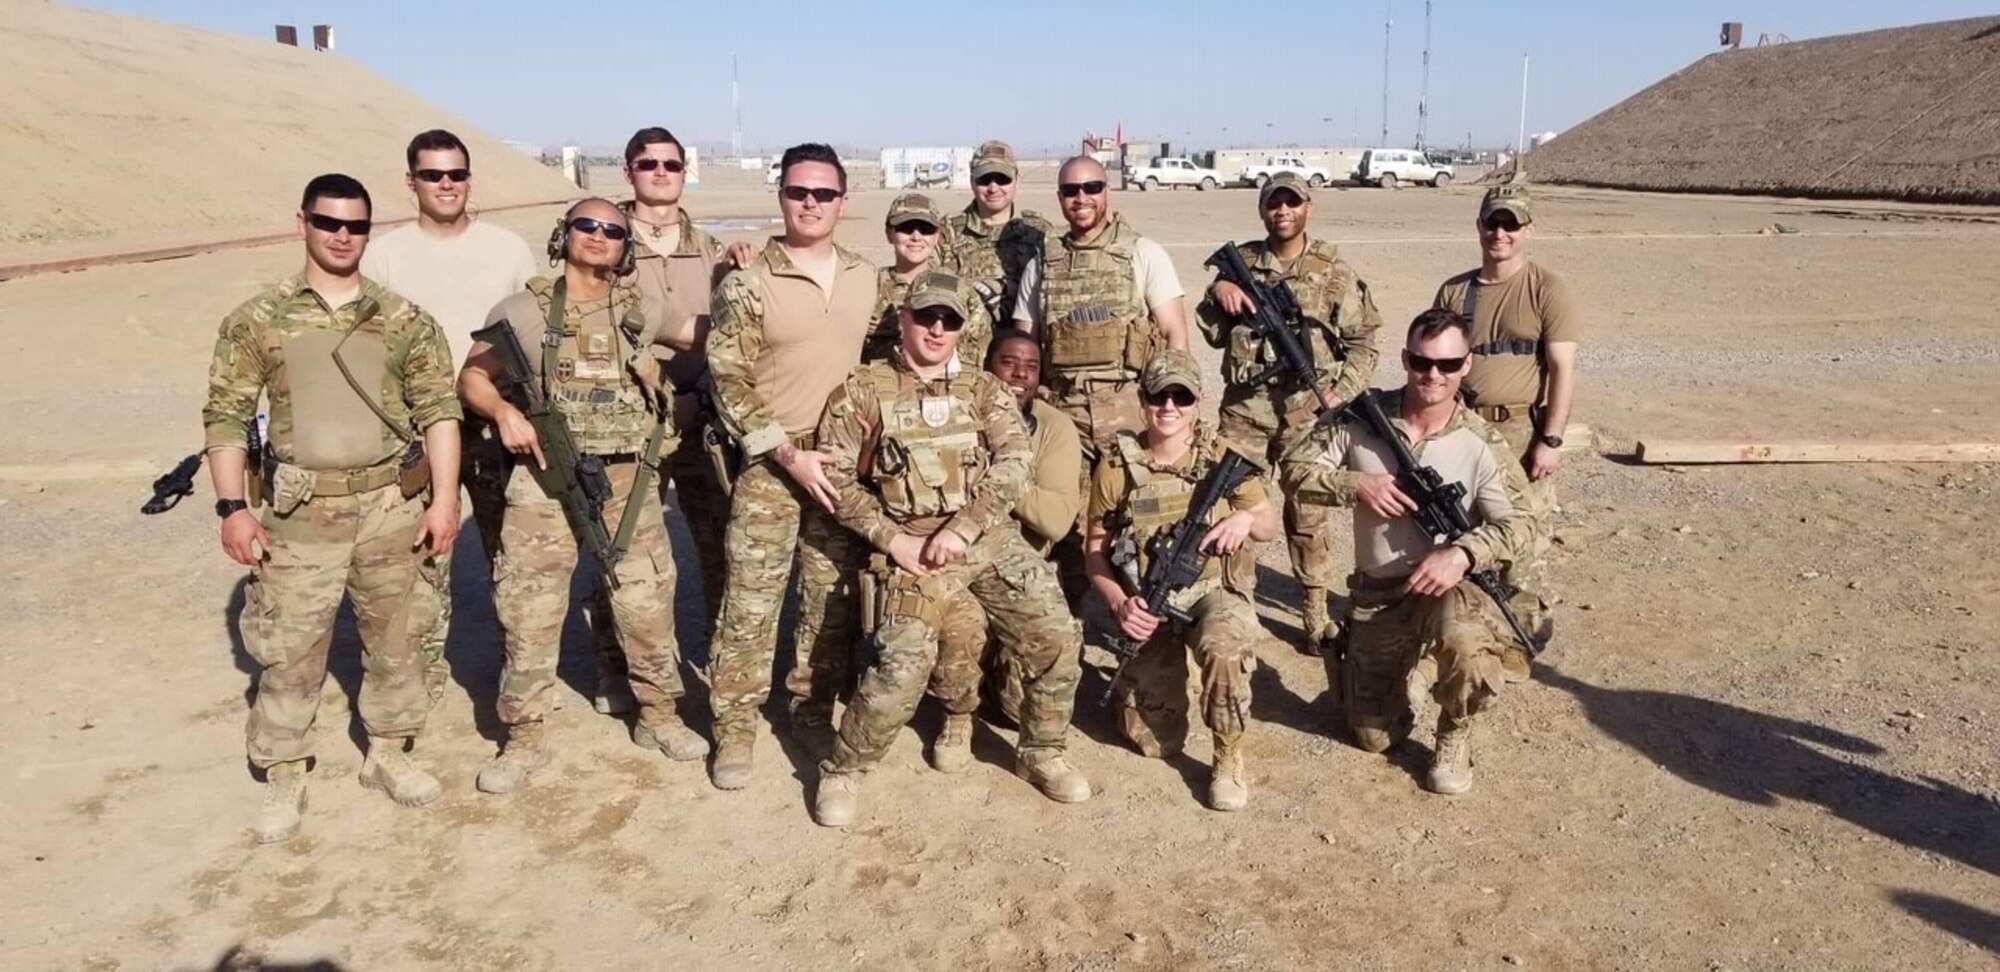 Capt. Shane Lockridge (front row kneeling first from the left) poses with his members of his team assigned to the 738th Air Expeditionary Advisory Group in Kandahar, Afghanistan.